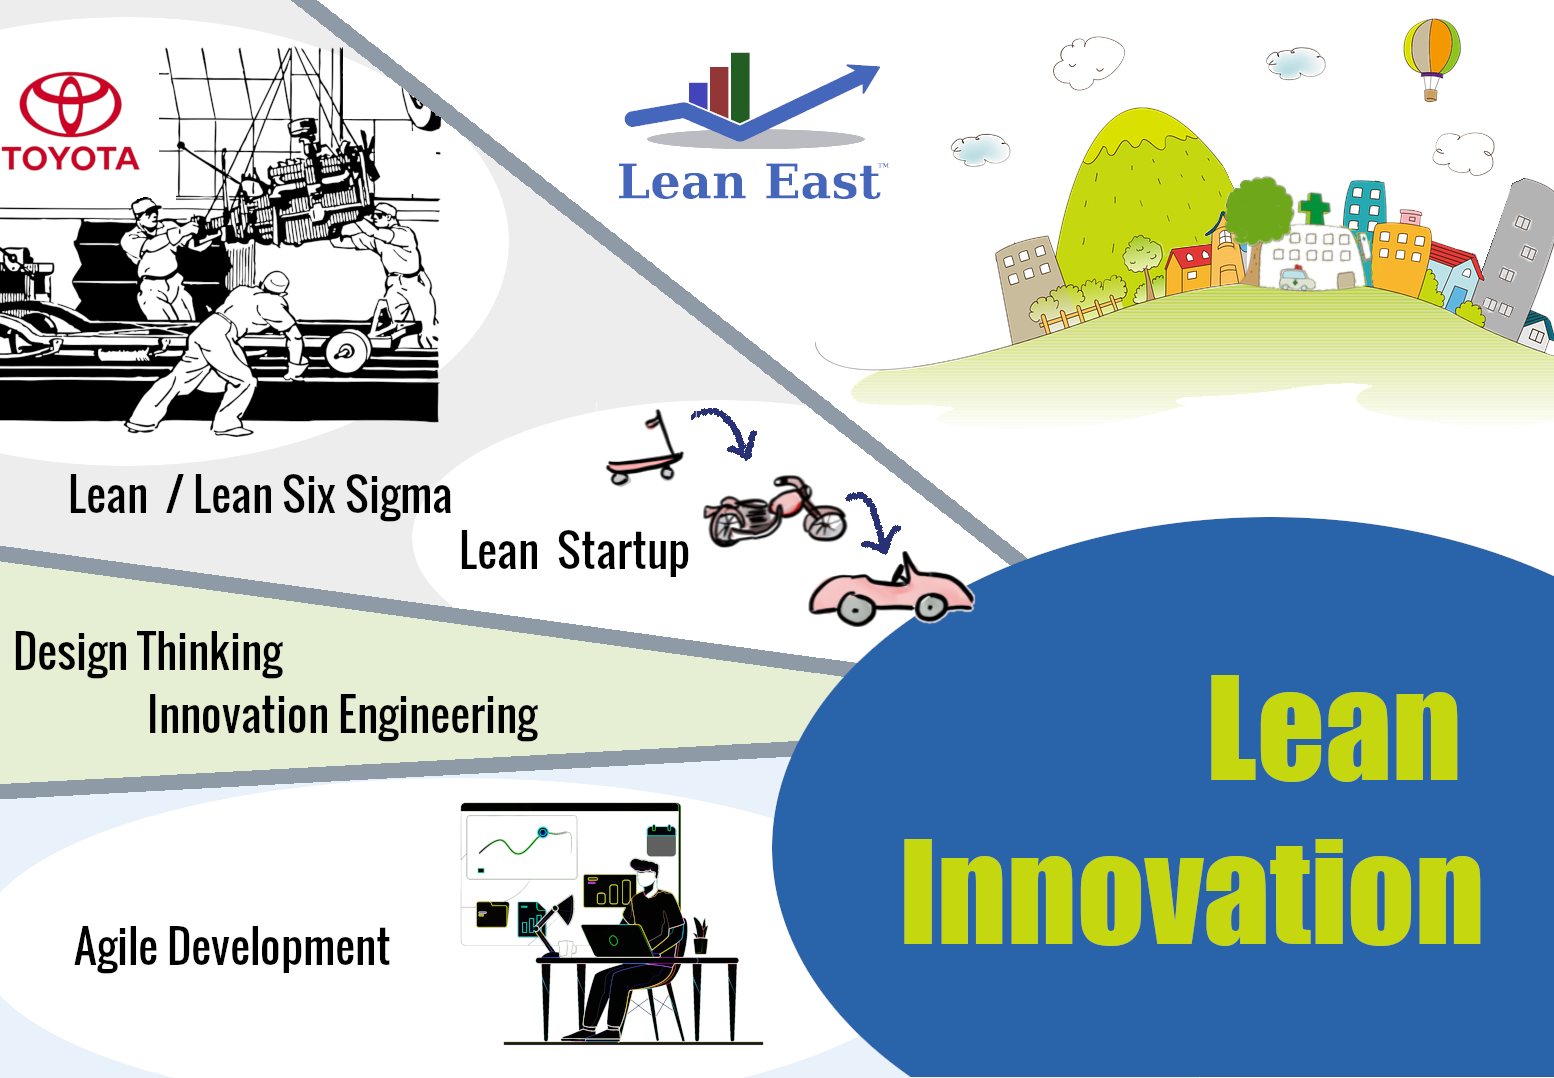 The Need for Lean Innovation